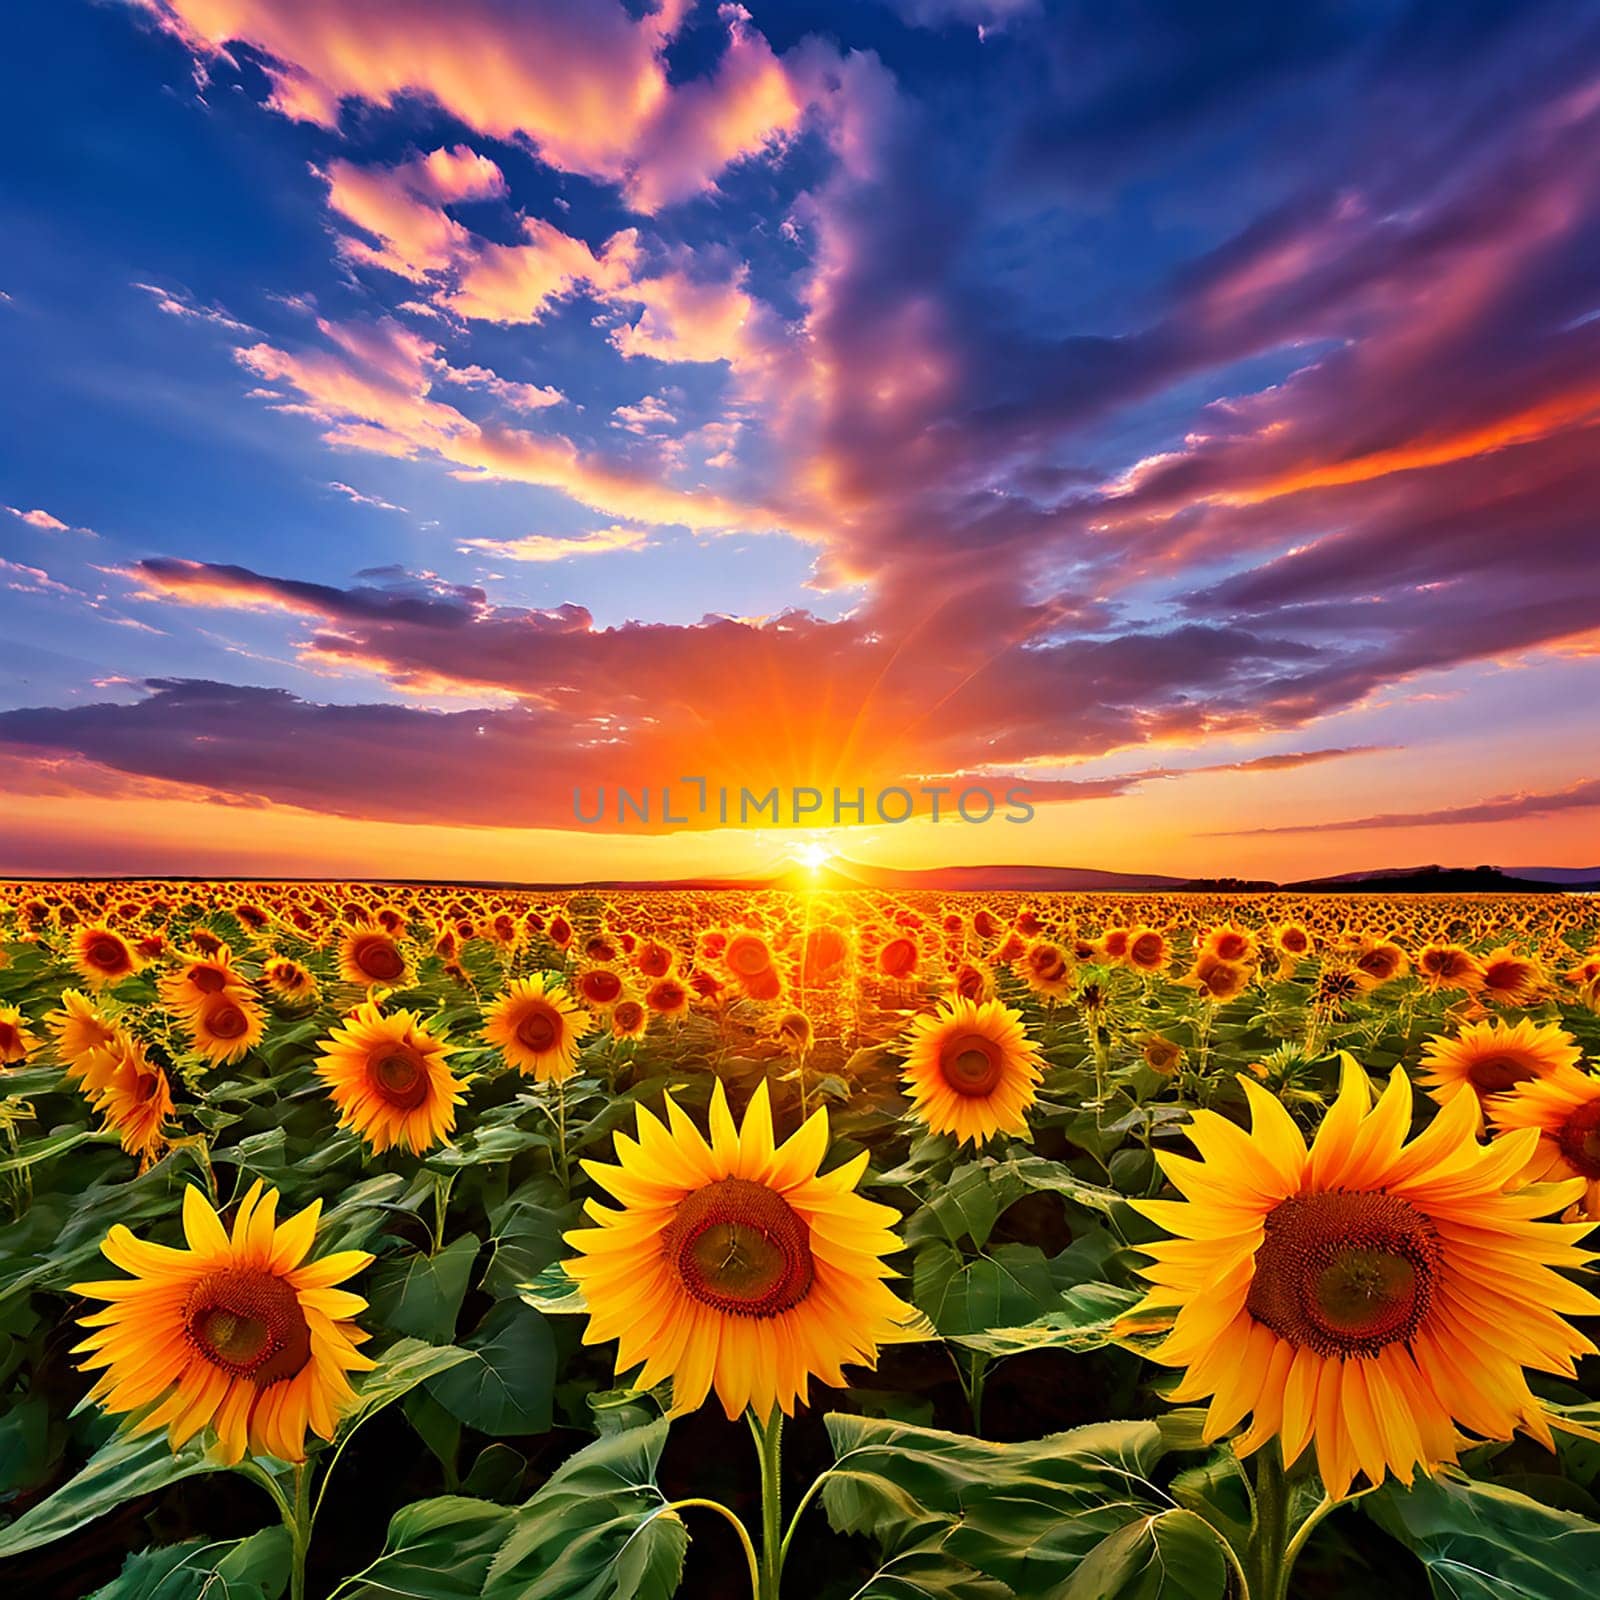 Sunflower Field Glistening in the Sunset by Petrichor